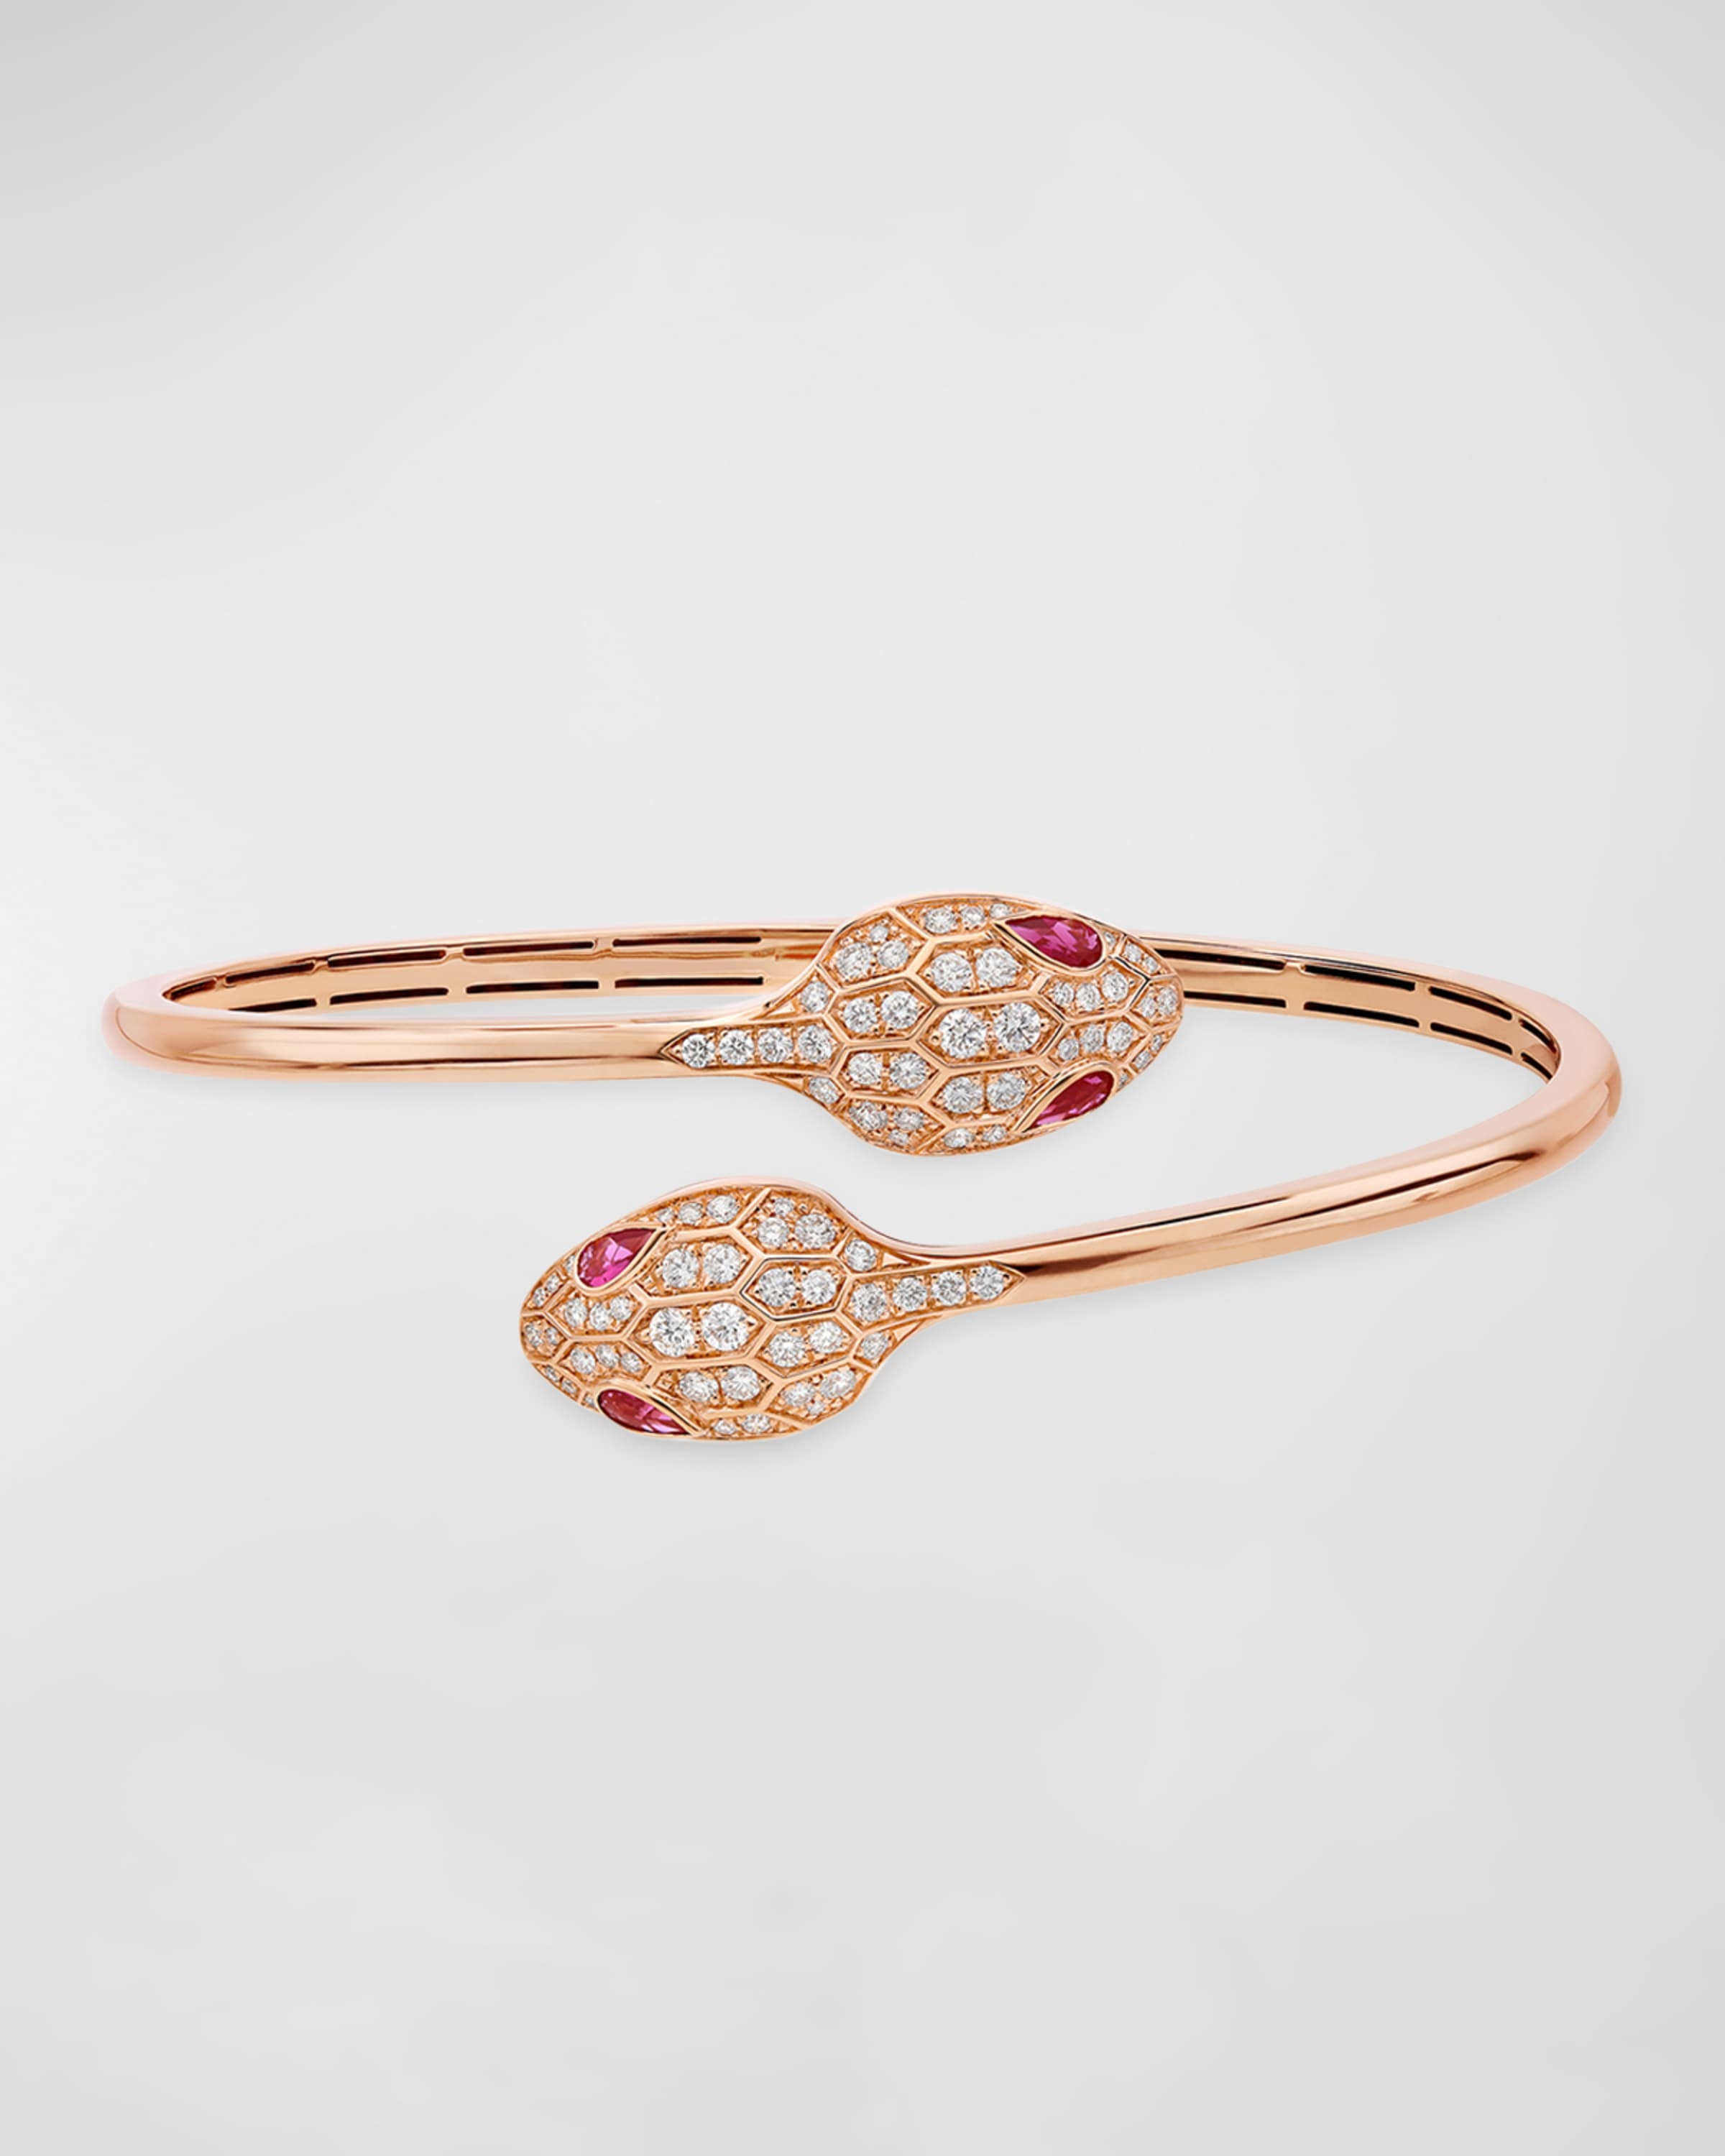 Serpenti Bypass Bracelet in 18k Rose Gold and Diamonds, Size M - 1